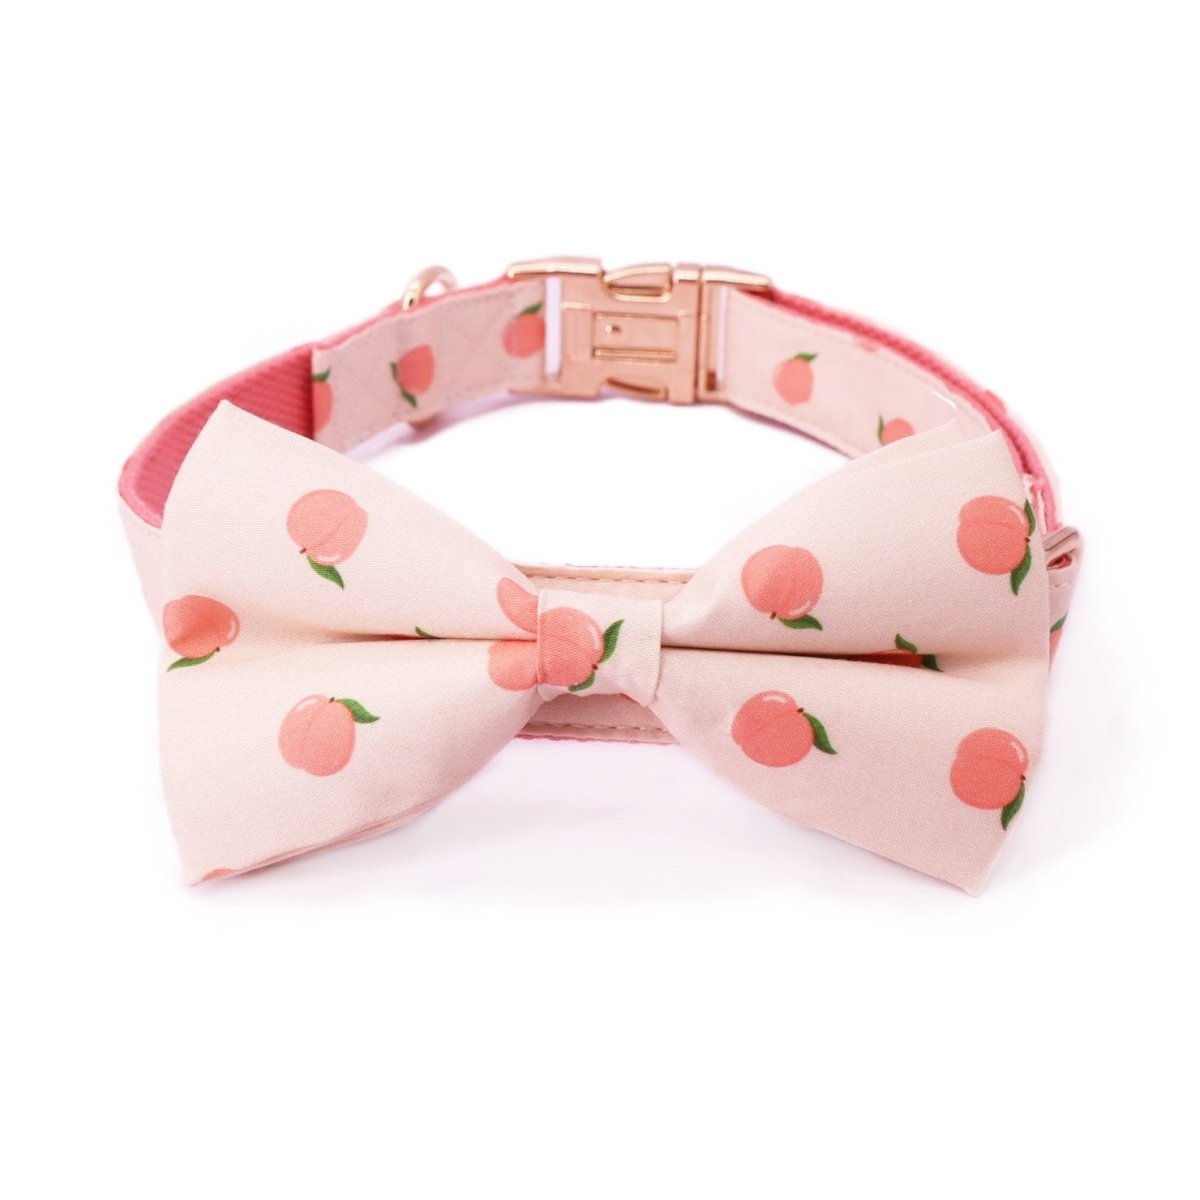 Designer dog collars with bow for boys and girls - Peach pattern collar with bow for dogs 